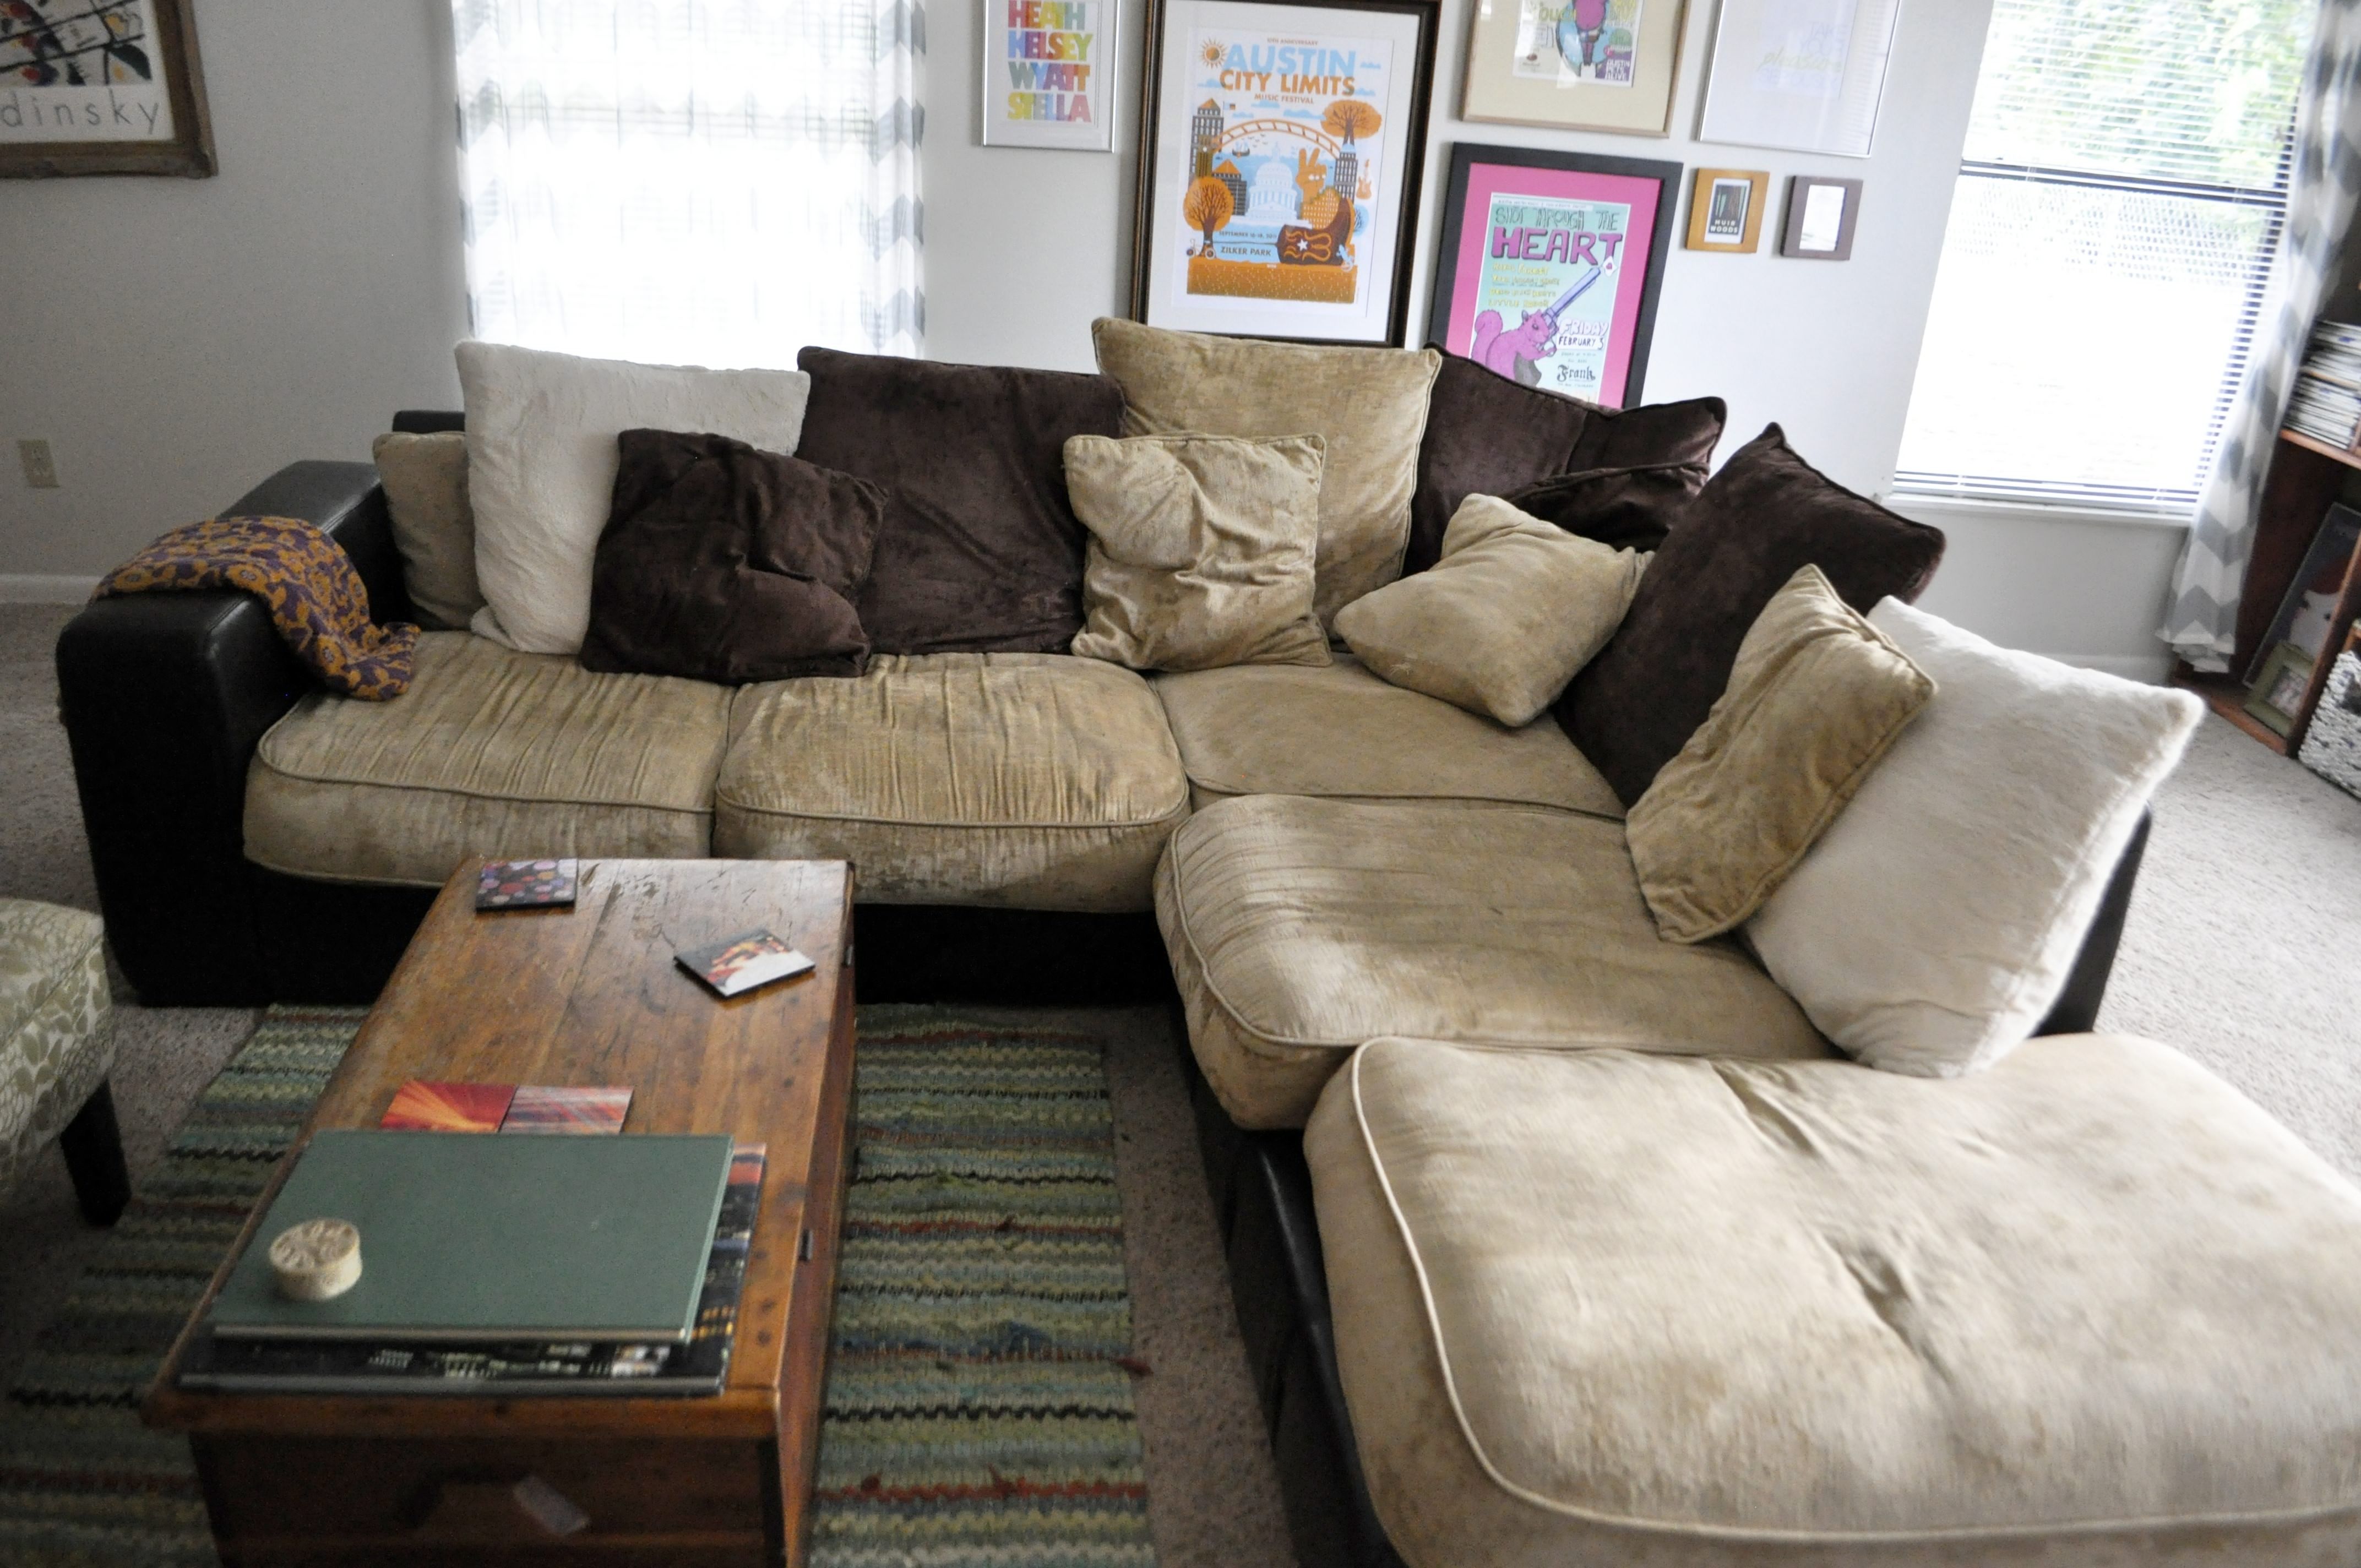 Picture Of Comfortable Sectional Sofa On Home Remodel Ideas Jk22 Regarding Comfy Sectional Sofa (Photo 8 of 12)